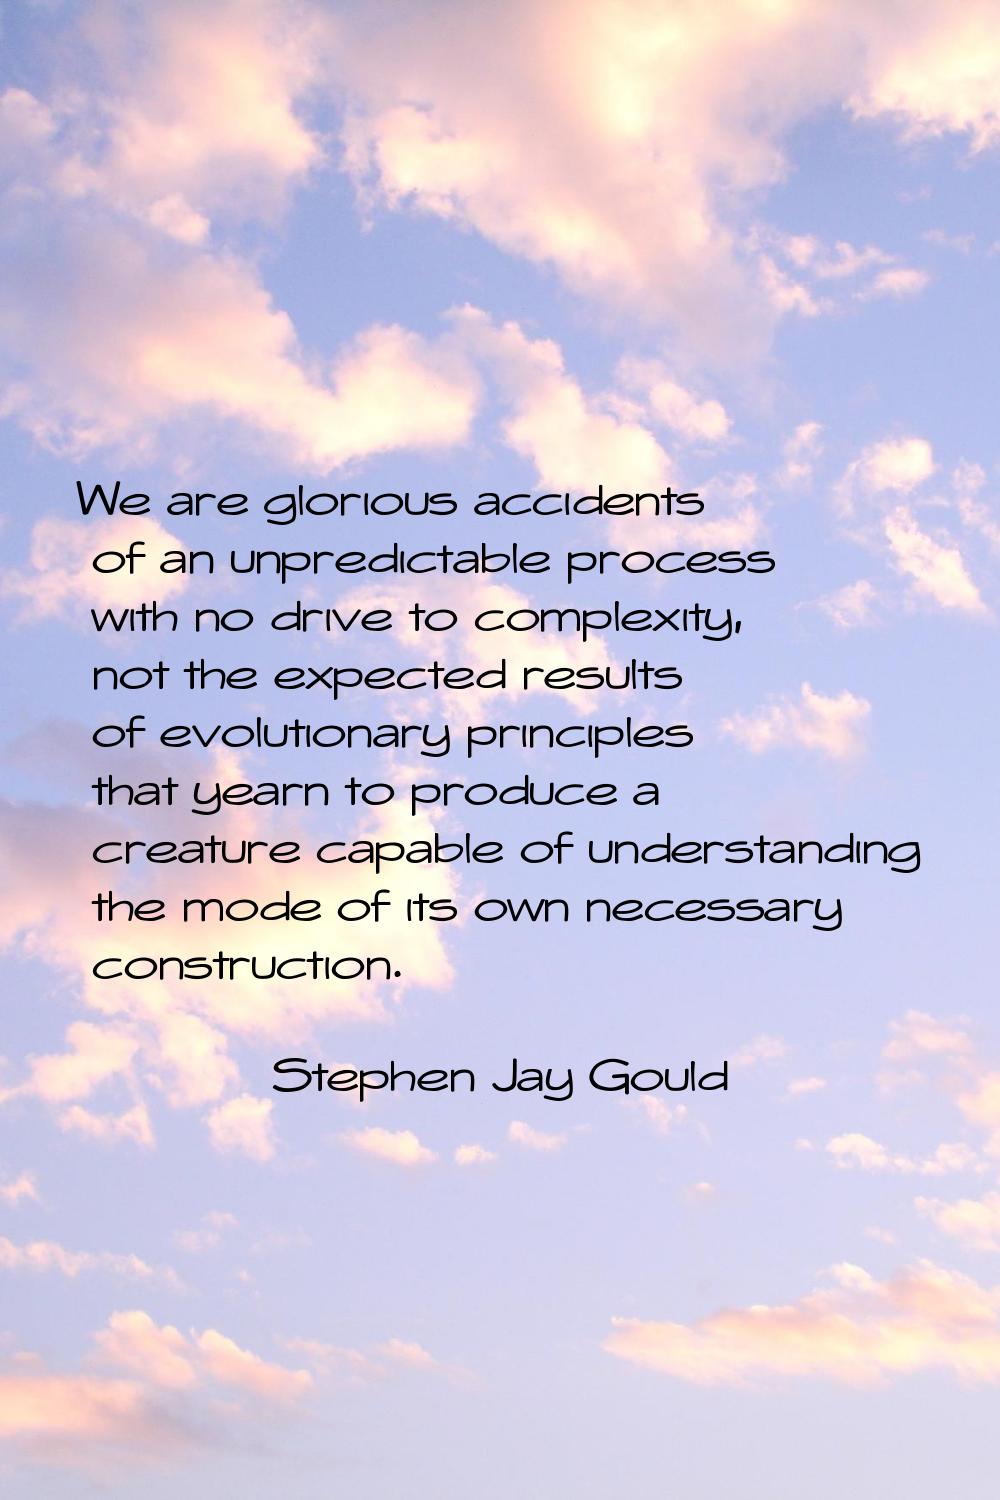 We are glorious accidents of an unpredictable process with no drive to complexity, not the expected